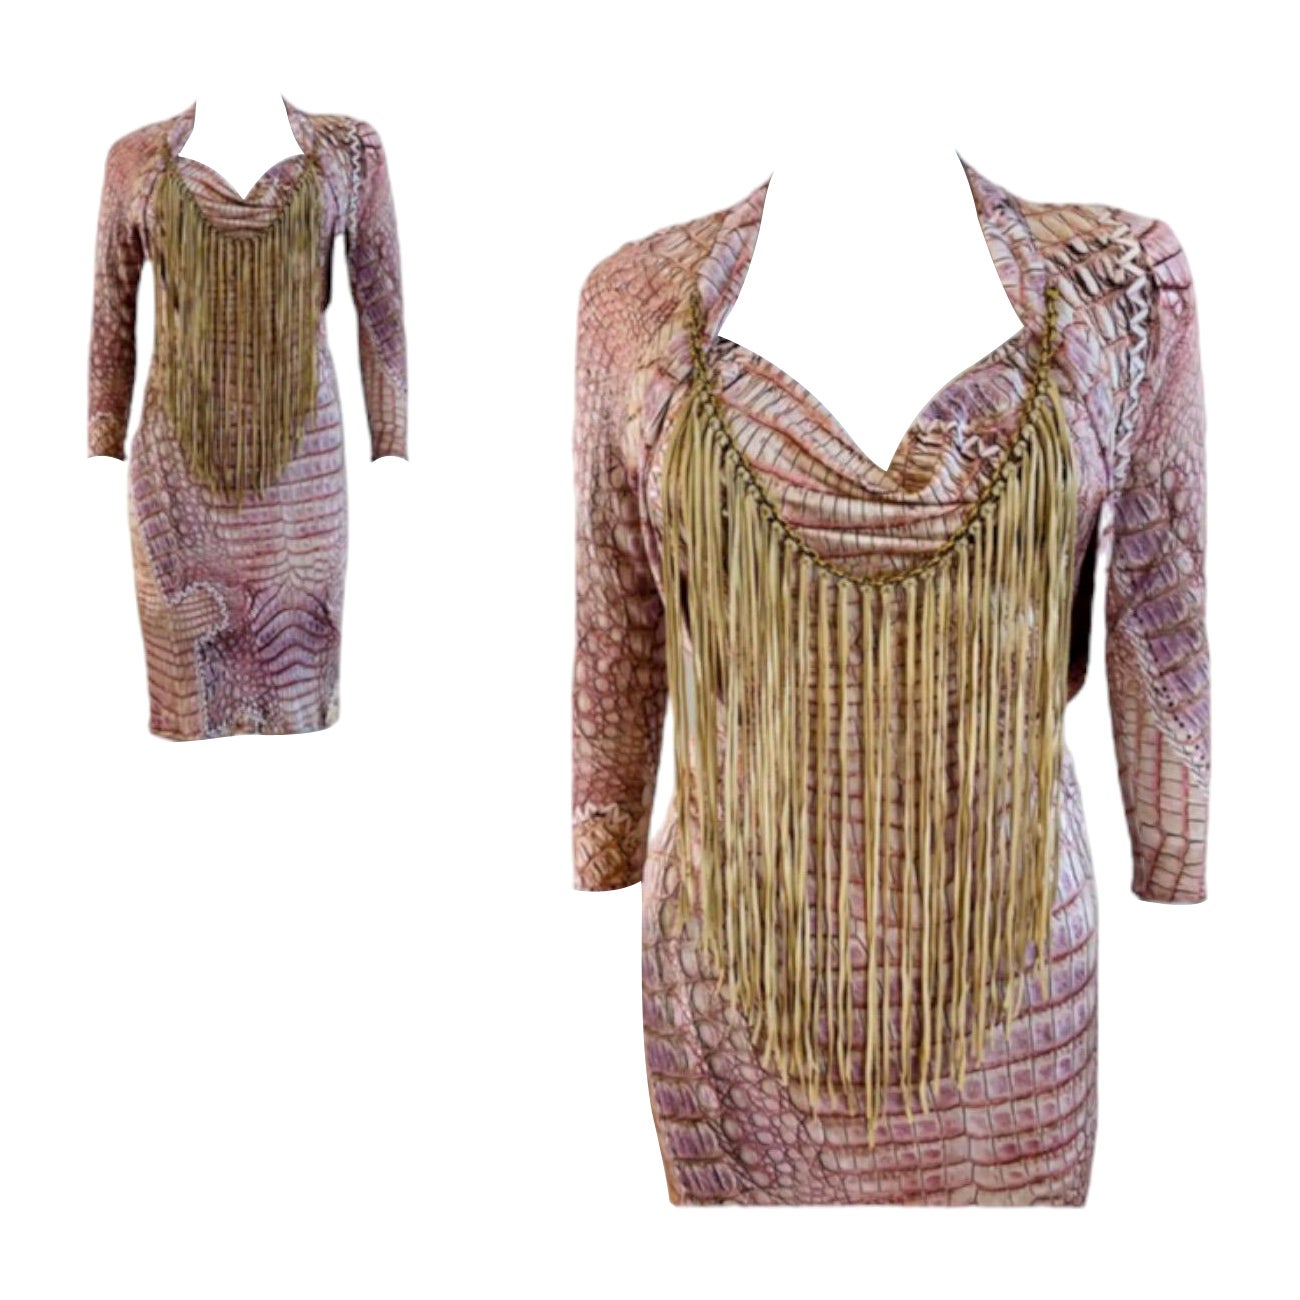 Vintage 2000s Y2K Roberto Cavalli Dress
Snake reptile print viscose fabric
Draped neckline 
Detachable gold tone chain with suede fringe
Fitted style wiggle fit dress
Long tapered sleeves
Lining has raw hem (not visible when worn) and is